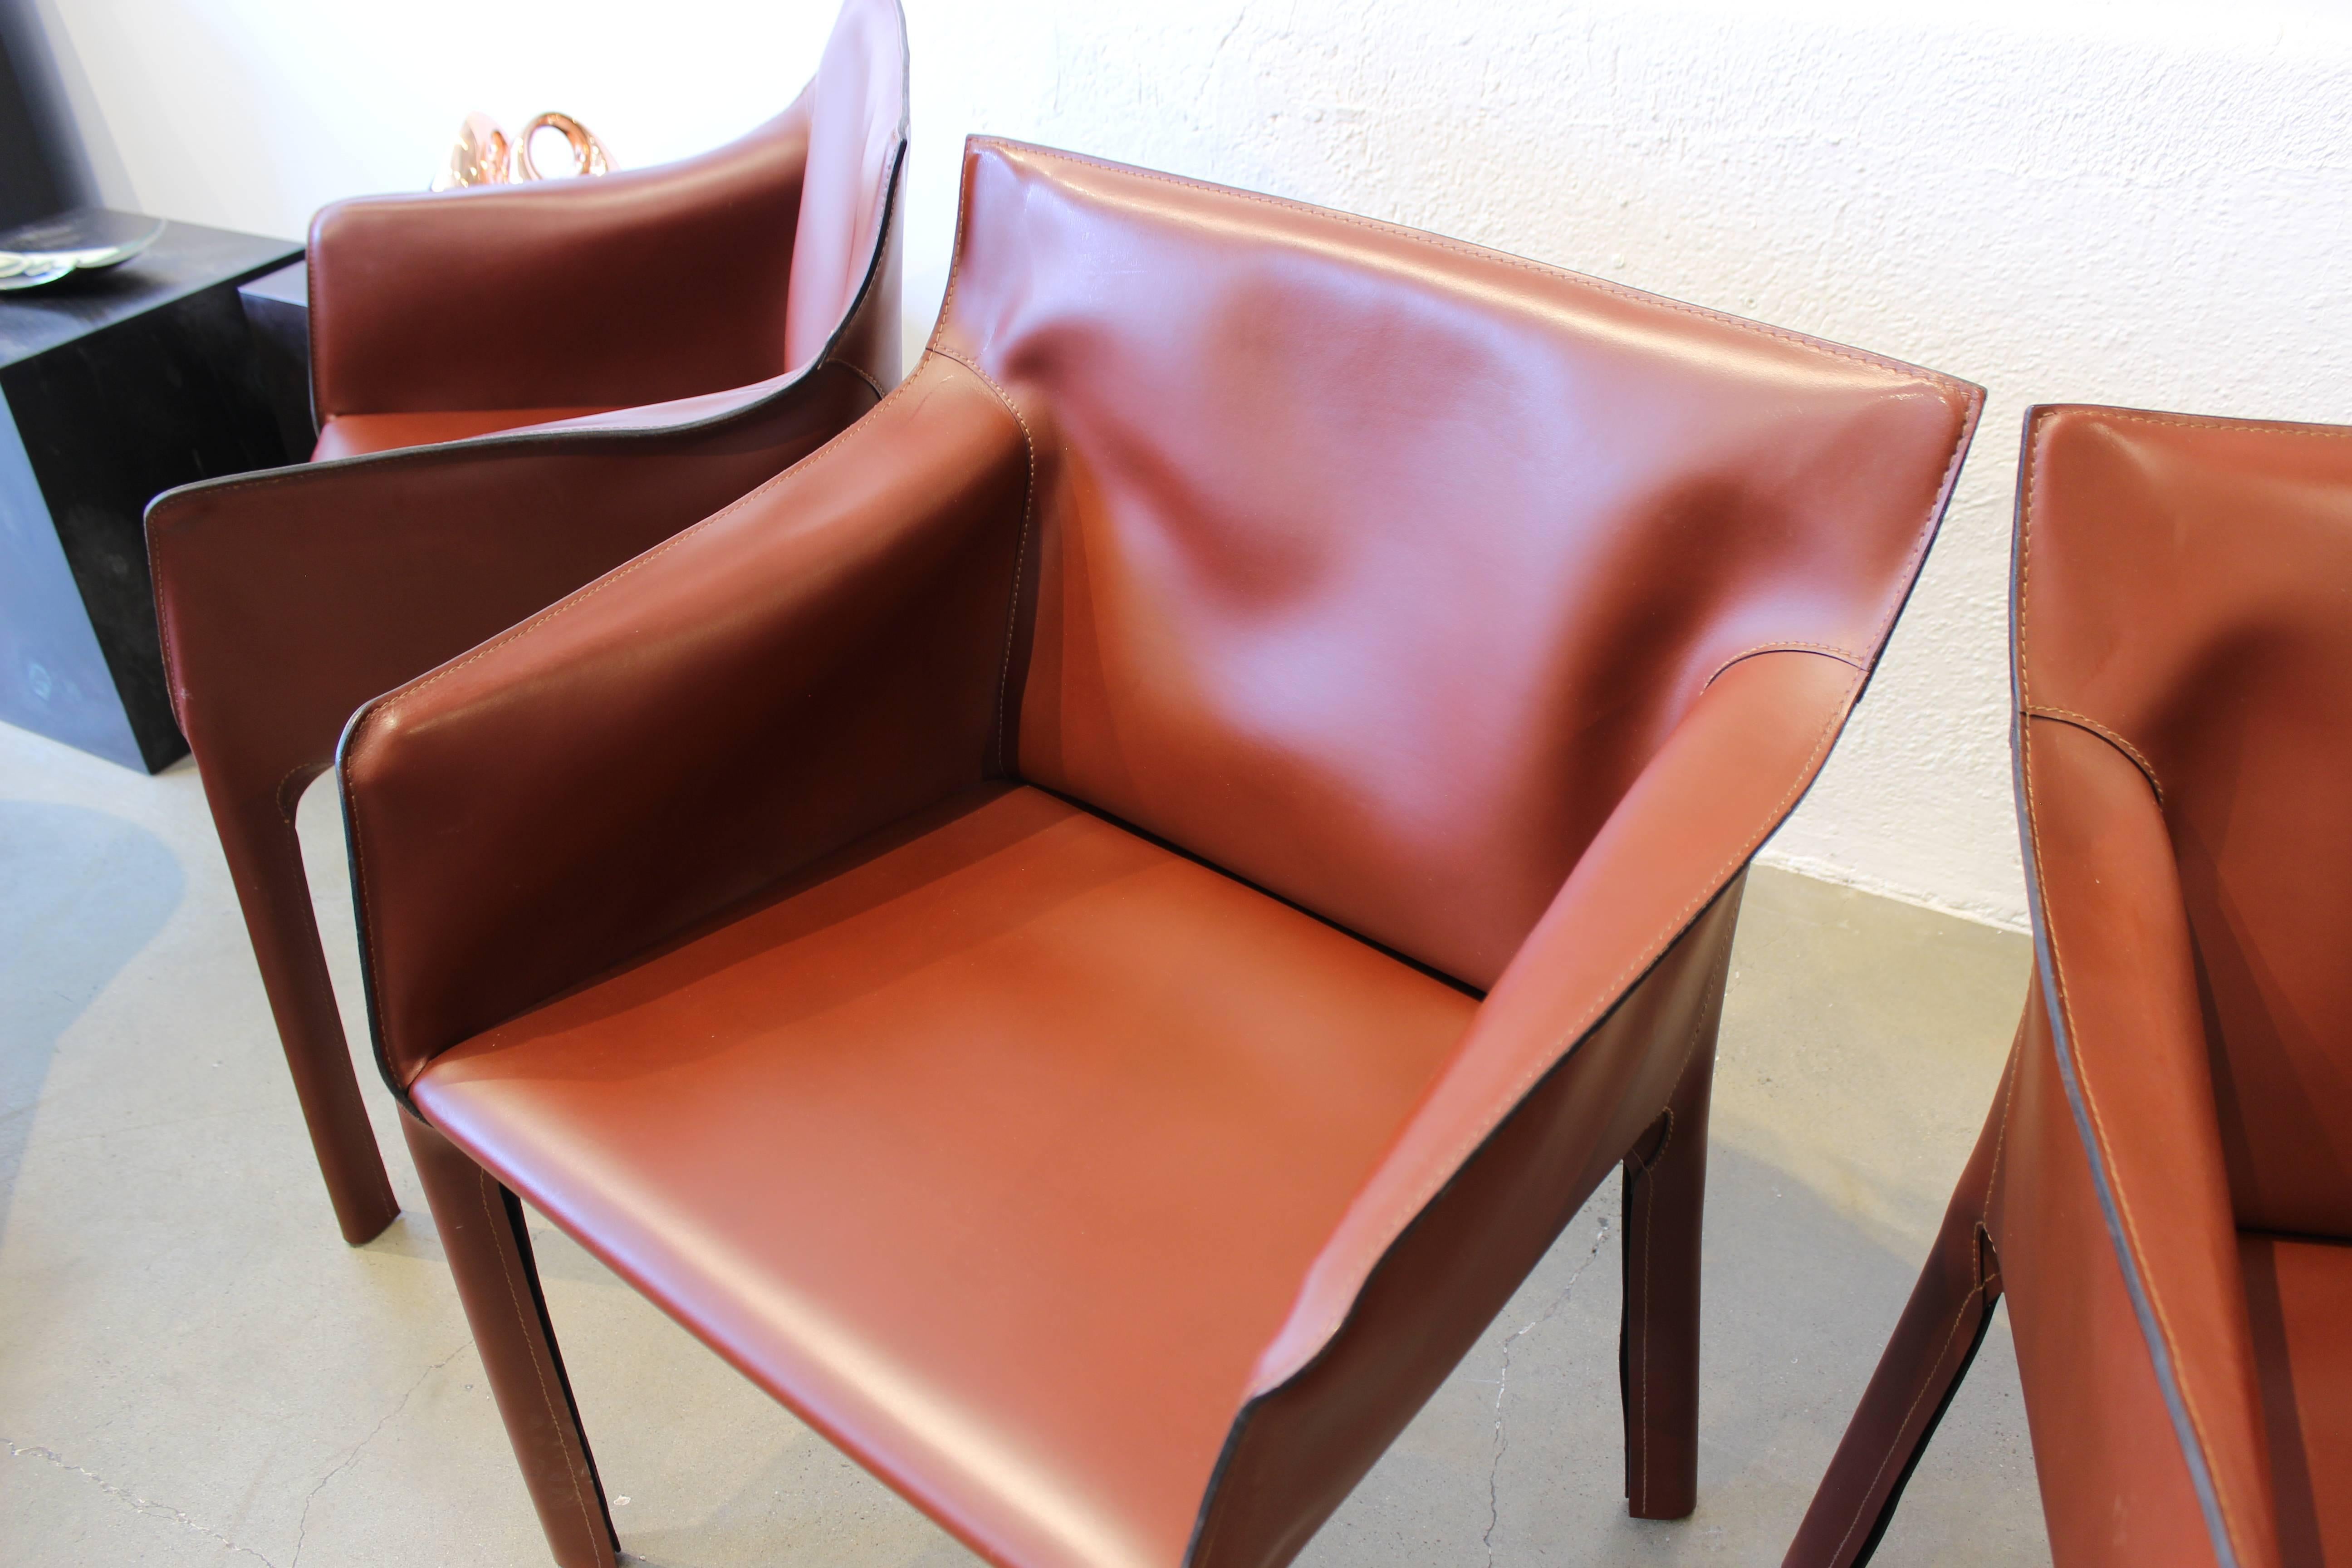 Gorgeous Russet Leather Armchairs by Matteo Grassi, Italy. Incredible quality and in excellent condition. Please inquire if interested in the full set of ten. Similar to the Cab chair by Mario Bellini for Cassina.

See this item in our private NYC